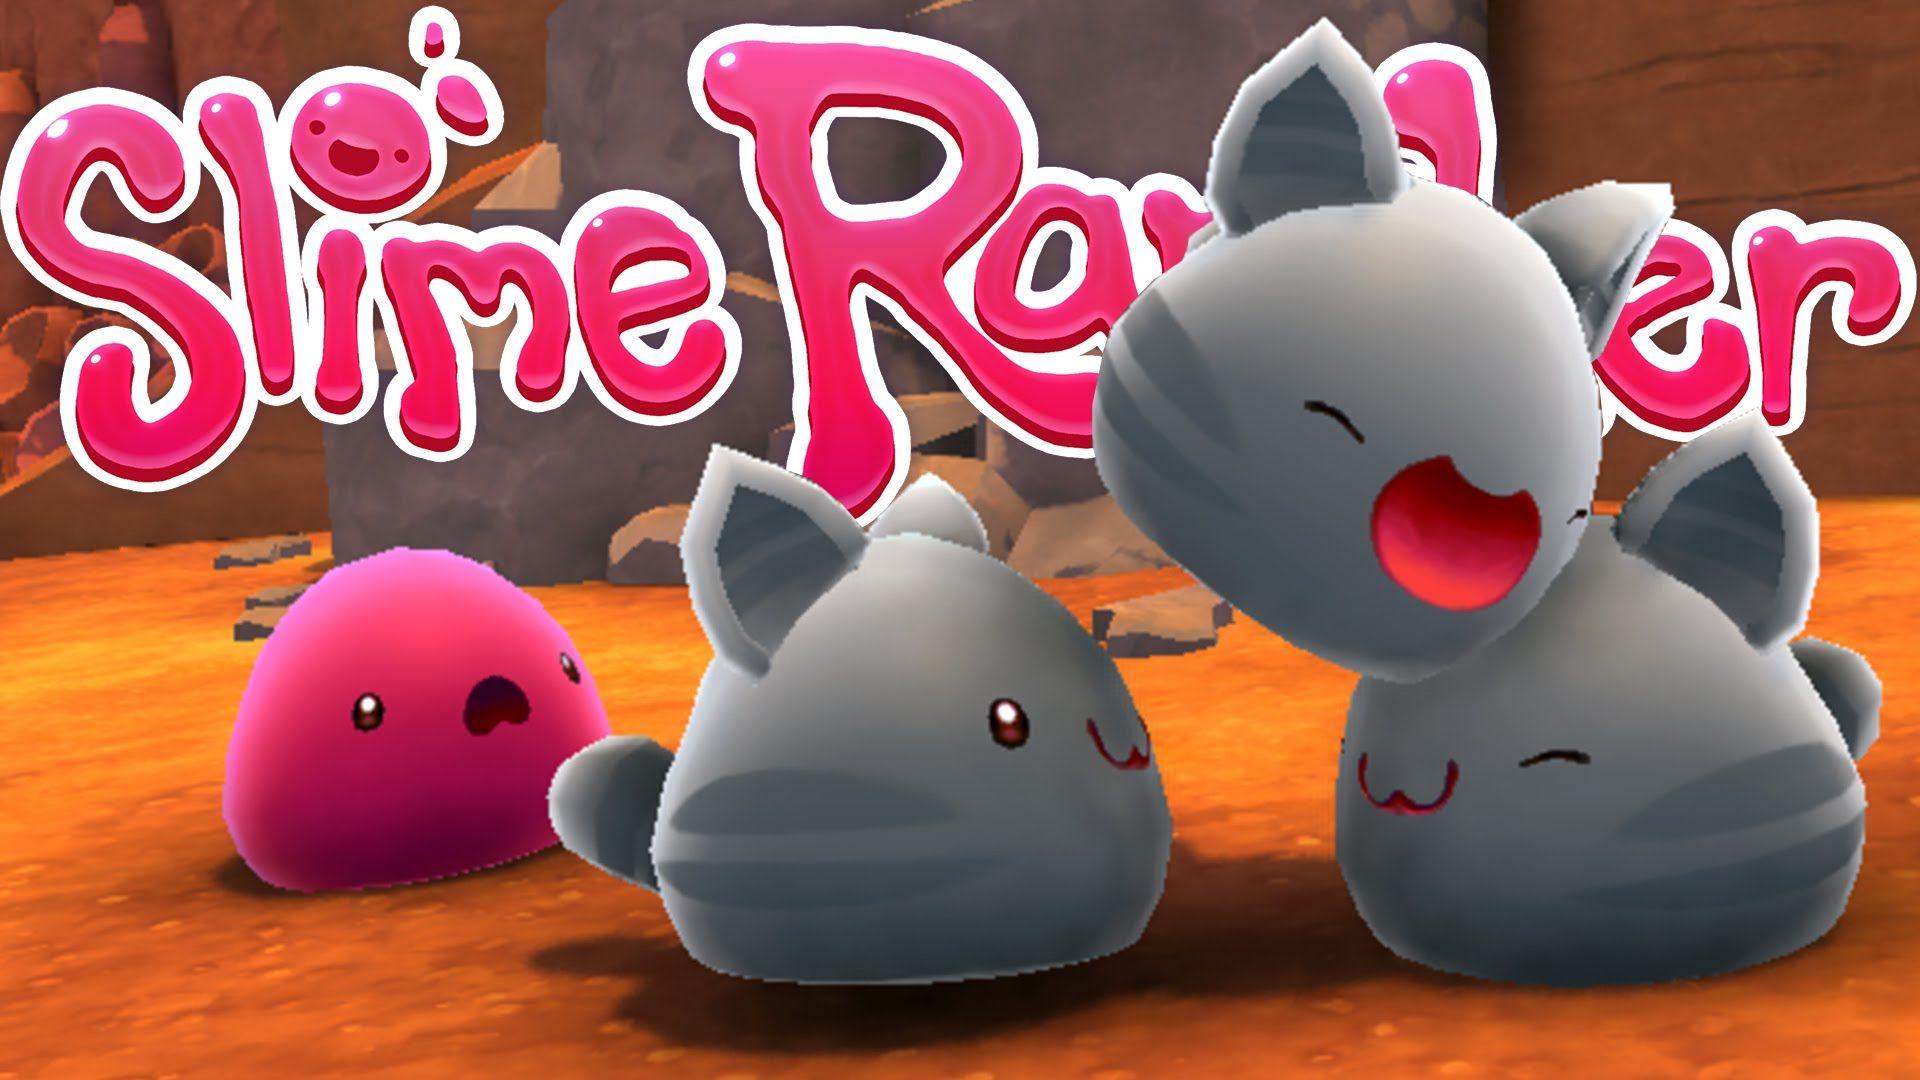 Spoiler Free Movie Sleuth: Movie Sleuth Gaming: Slime Rancher Reviewed